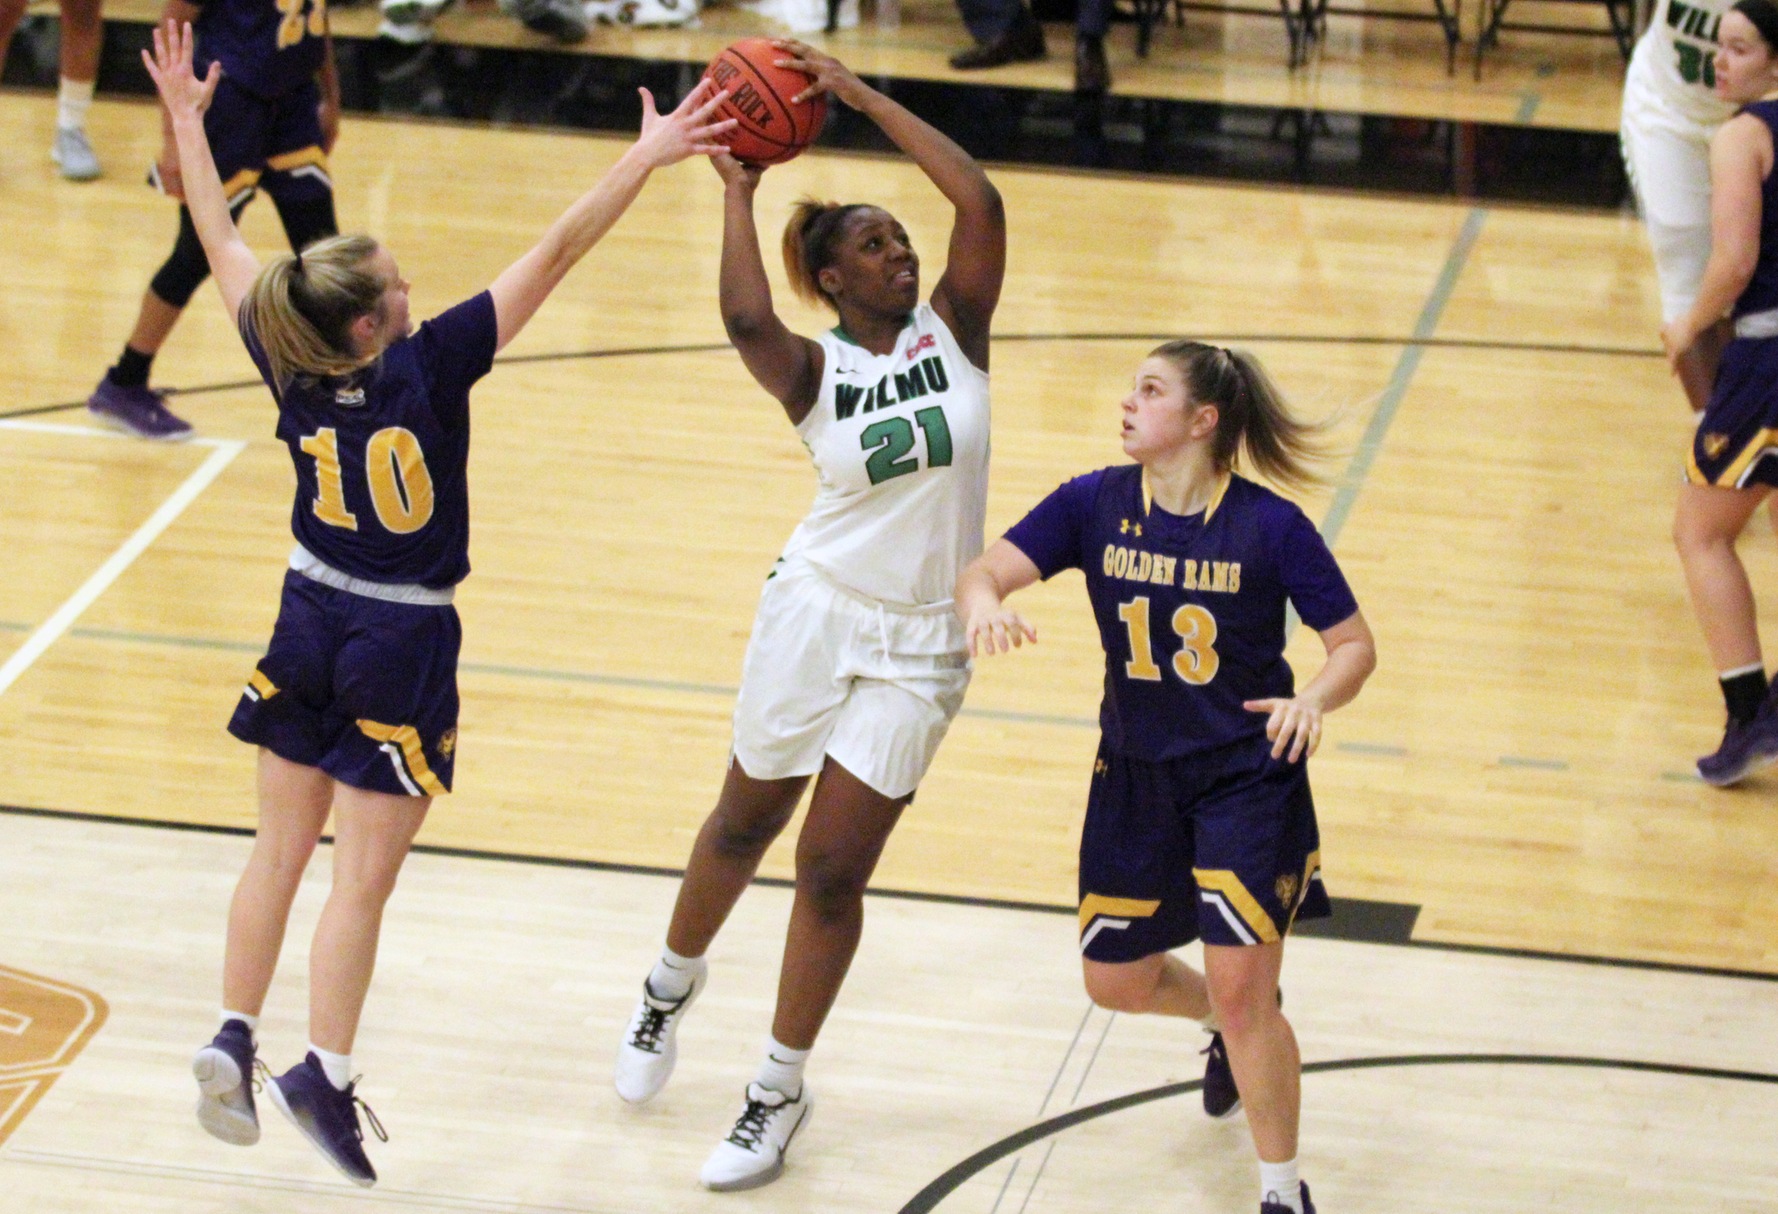 Photo of Tiffany Jackson who led the team with 15 points and 9 rebounds. Copyright 2019; Wilmington University. All rights reserved. November 14, 2019 vs. West Chester. Photo by Mary Kate Rumbaugh.